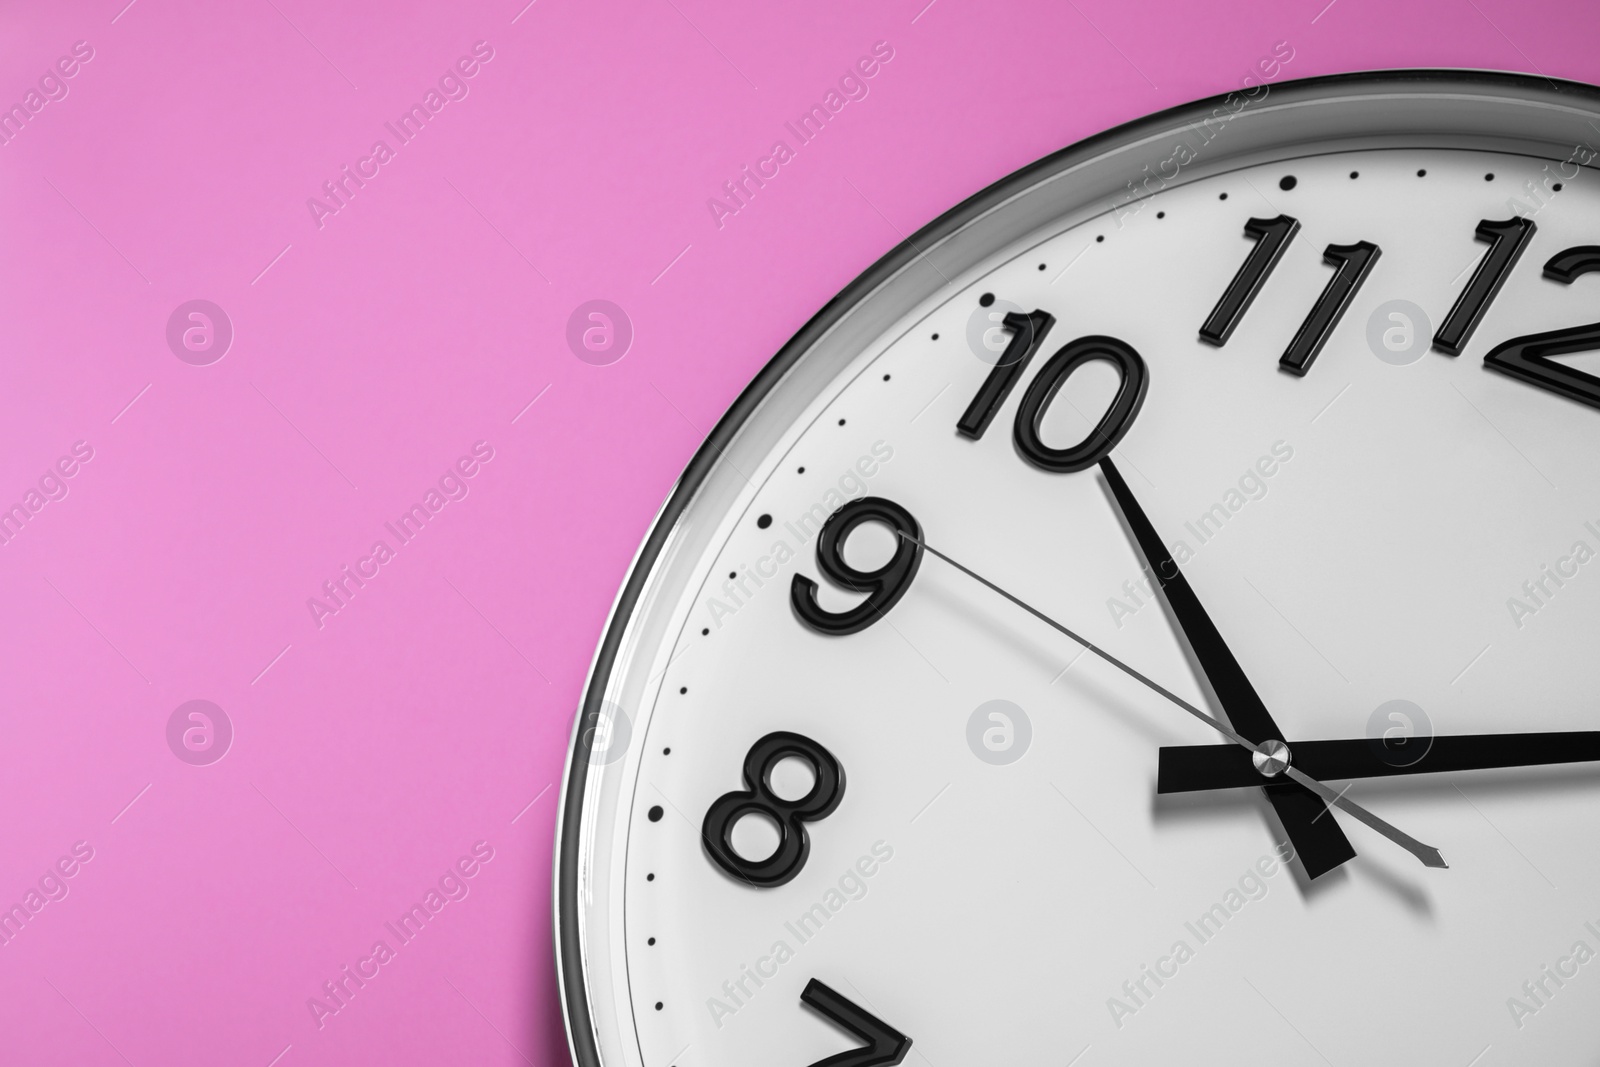 Photo of Stylish round clock on pale pink background, top view with space for text. Interior element